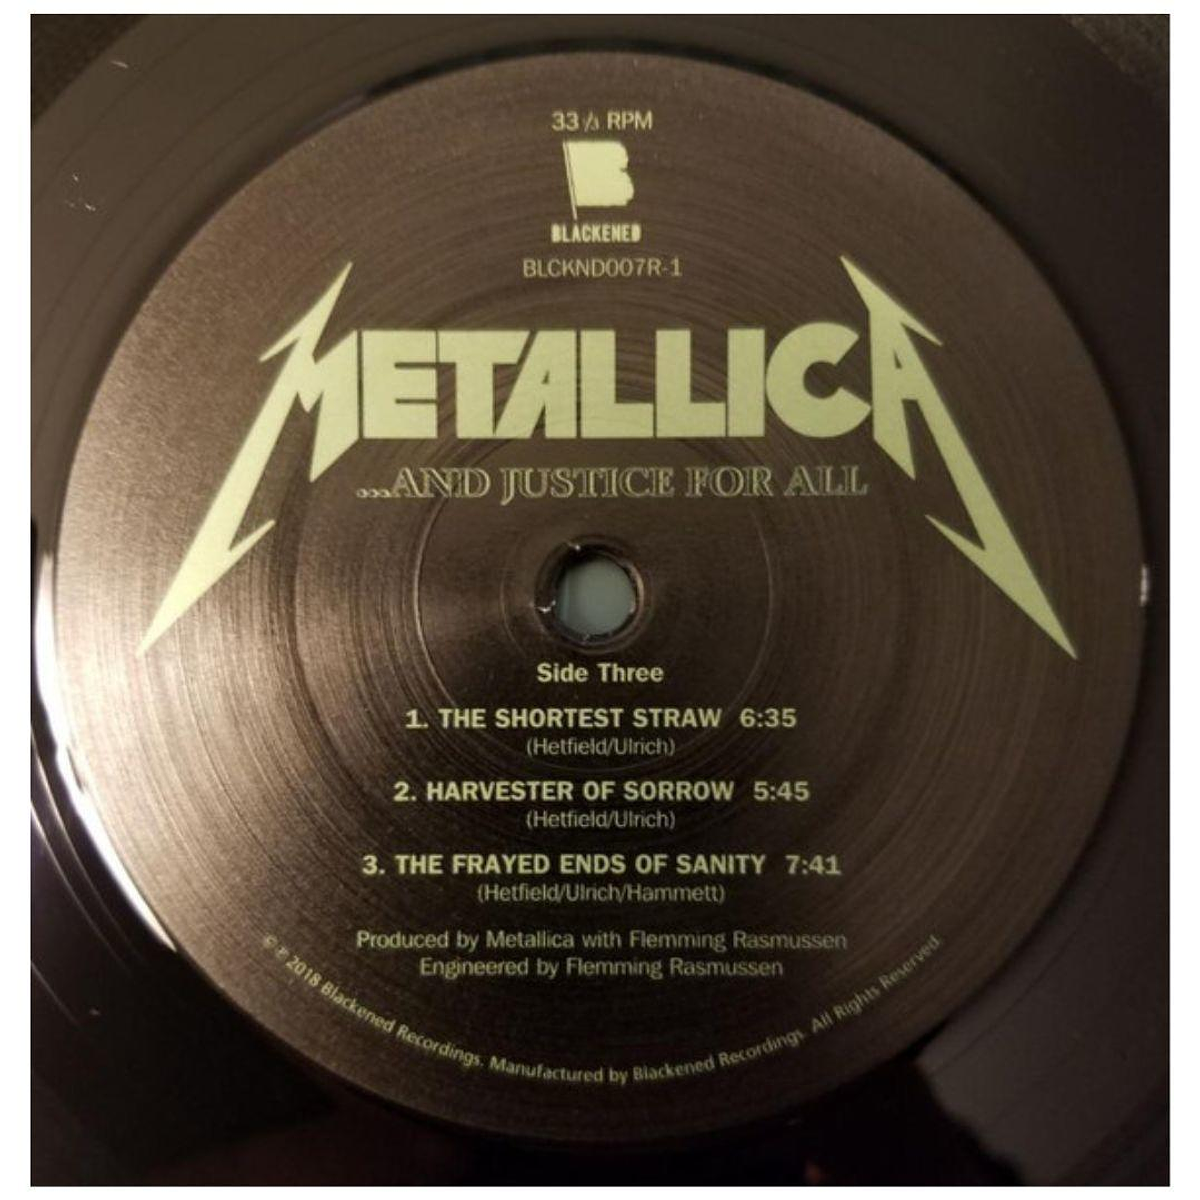 METALLICA - AND JUSTICE FOR ALL (2LP) (BLACKENED)